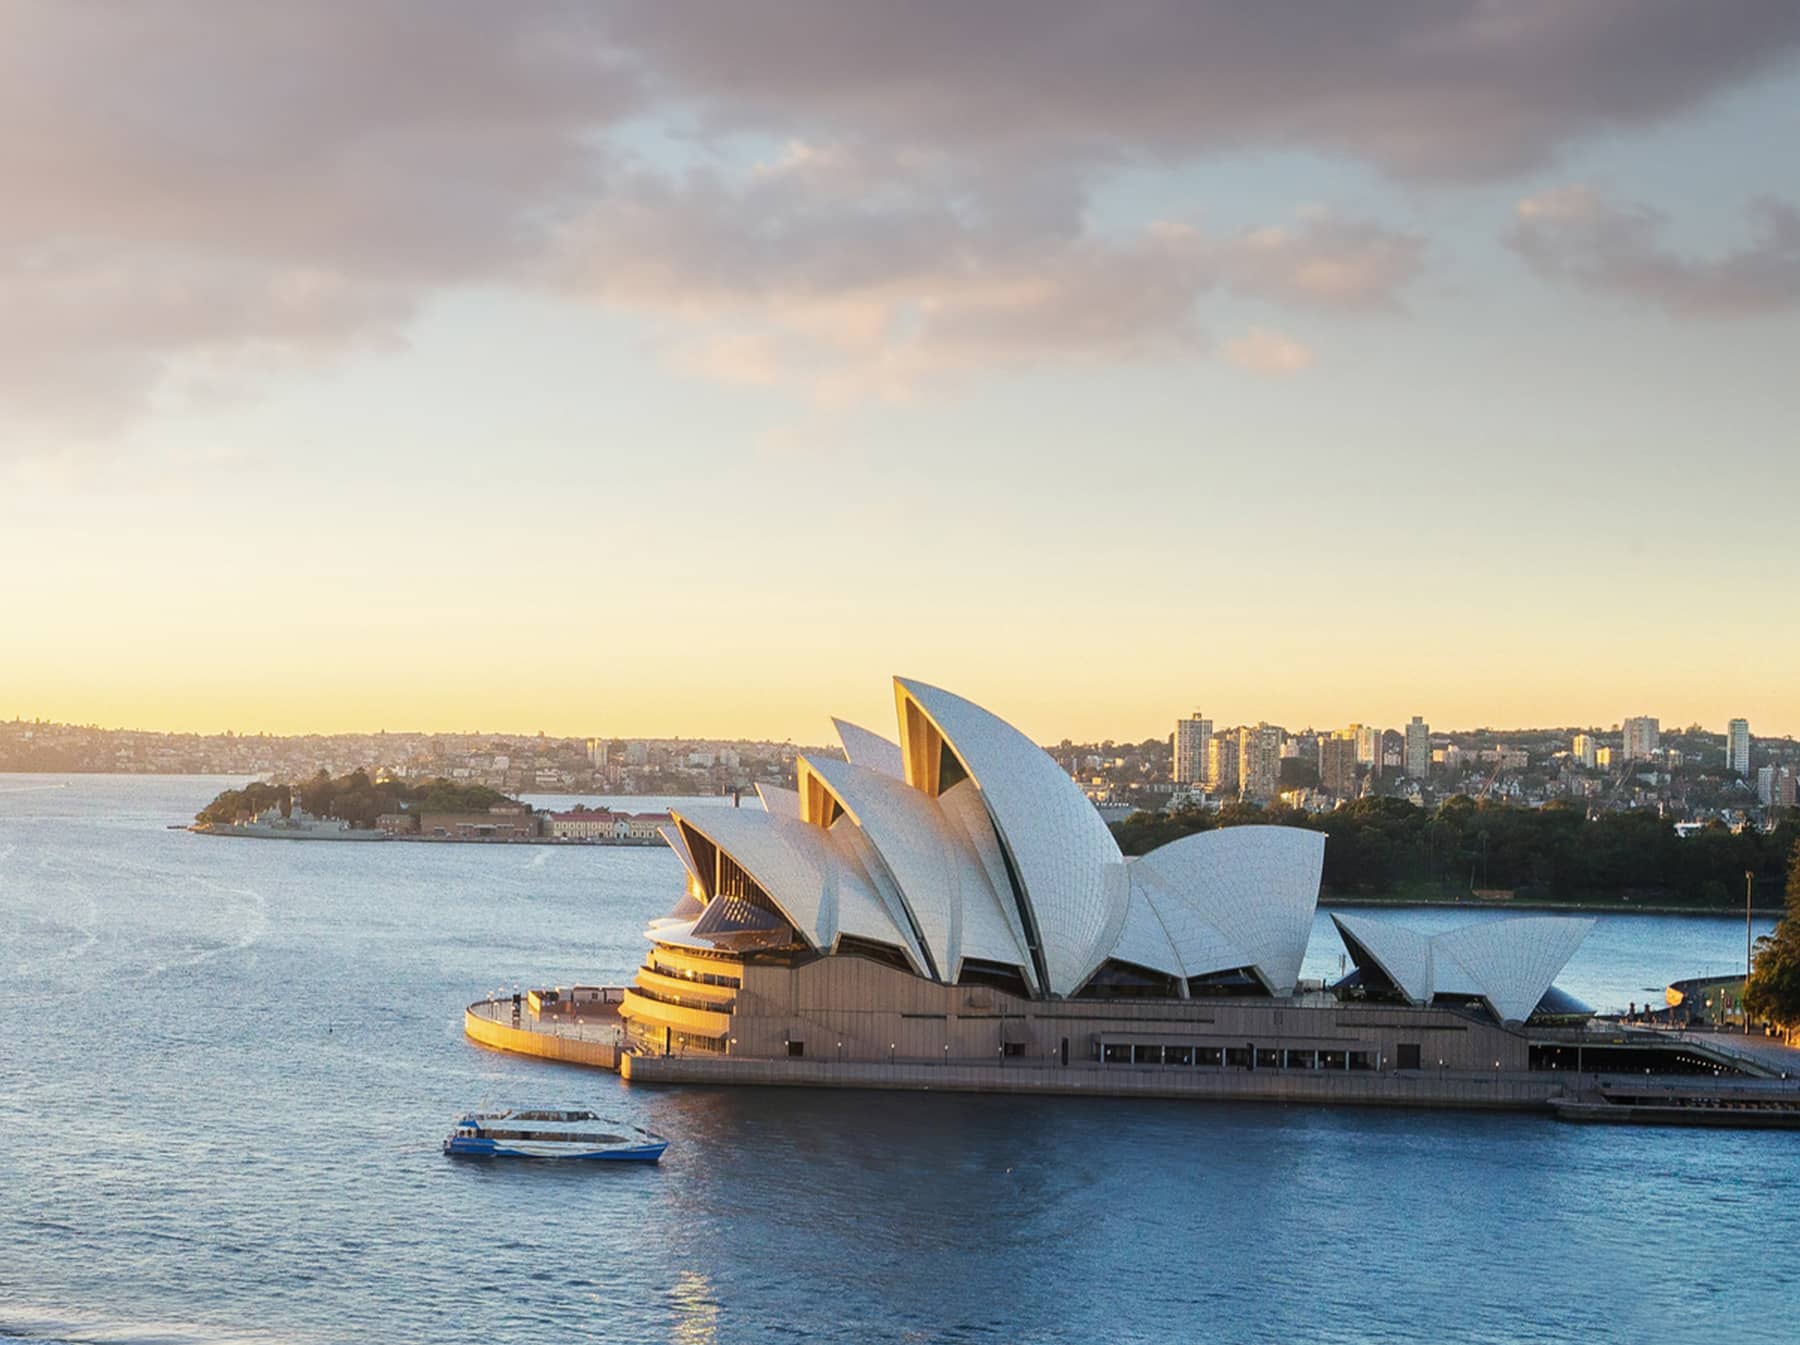  Go behind the scenes at Sydney’s Opera House.  